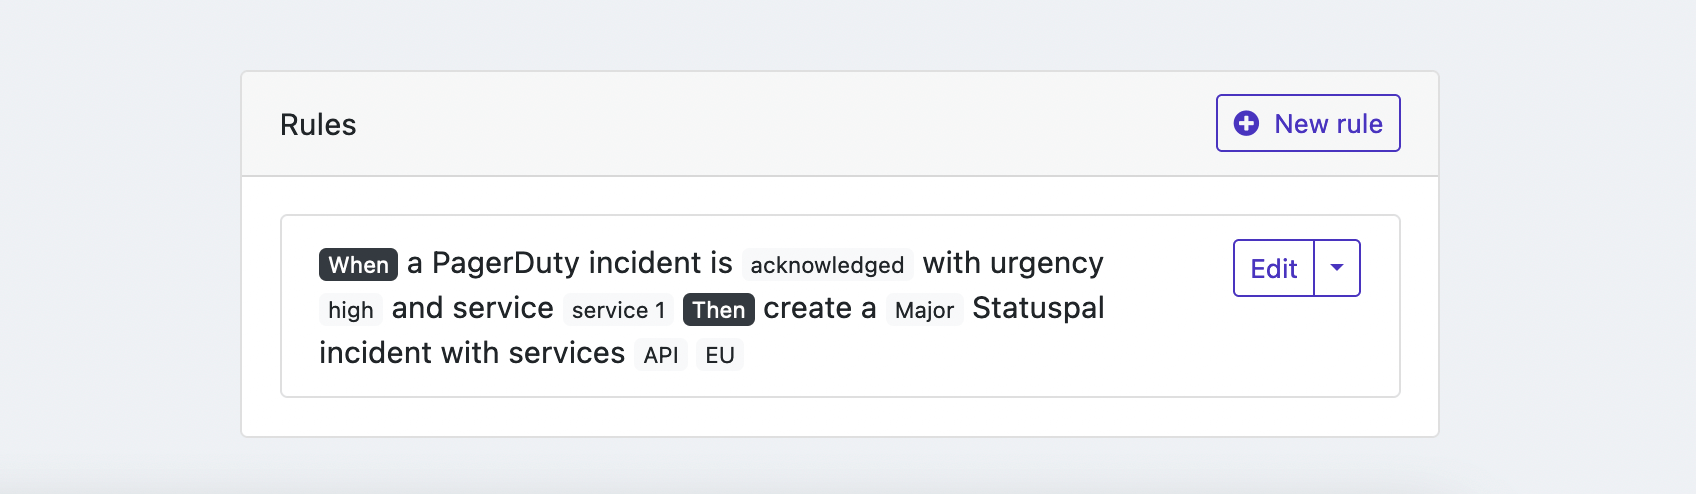 PagerDuty incident automation rules for Statuspal status page